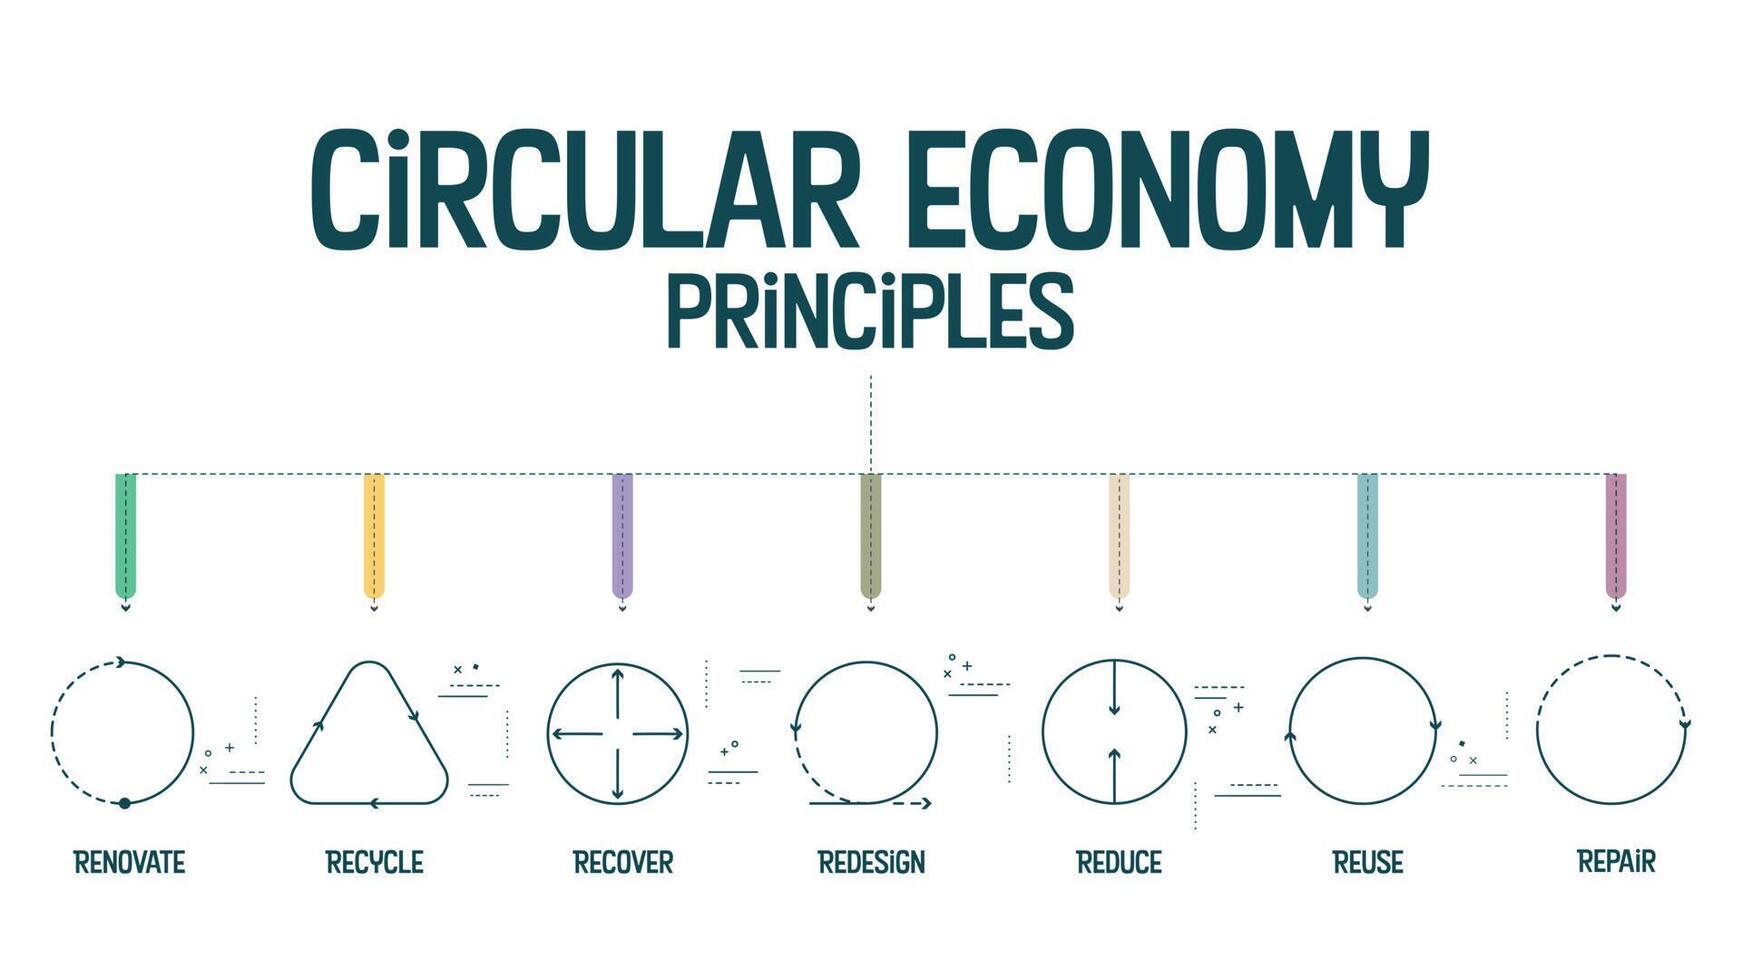 7R circular economy principles concept for economic sustainability of production and consumption has 7 steps to analyze such as reduce, recycle, recover, repair, redesign, reuse and renovate. Vector. vector